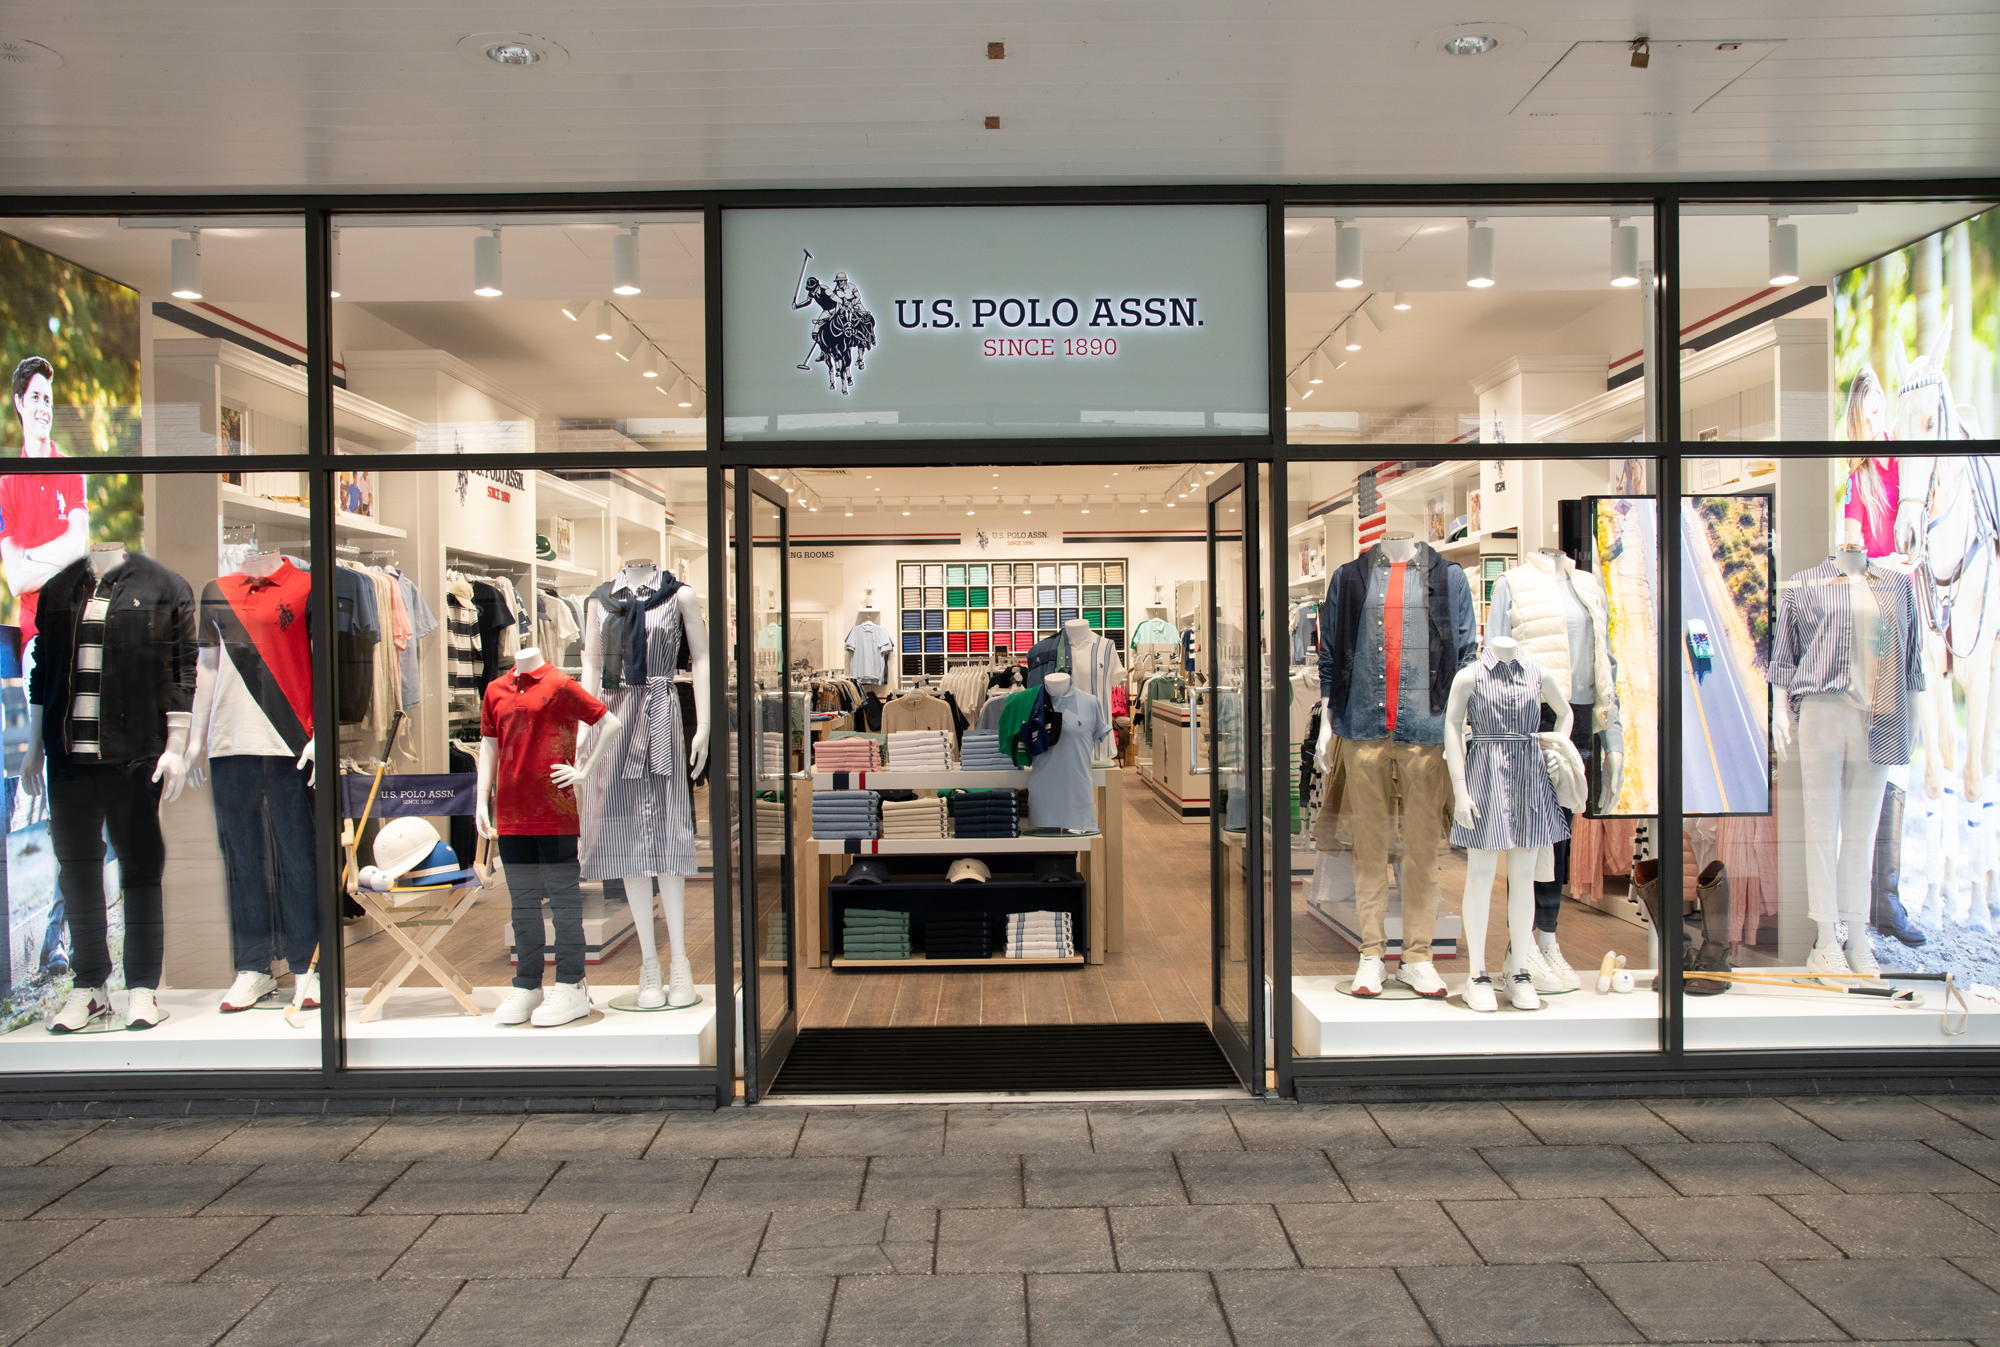 U.S. Polo Assn. East Midlands store 1 (1).png